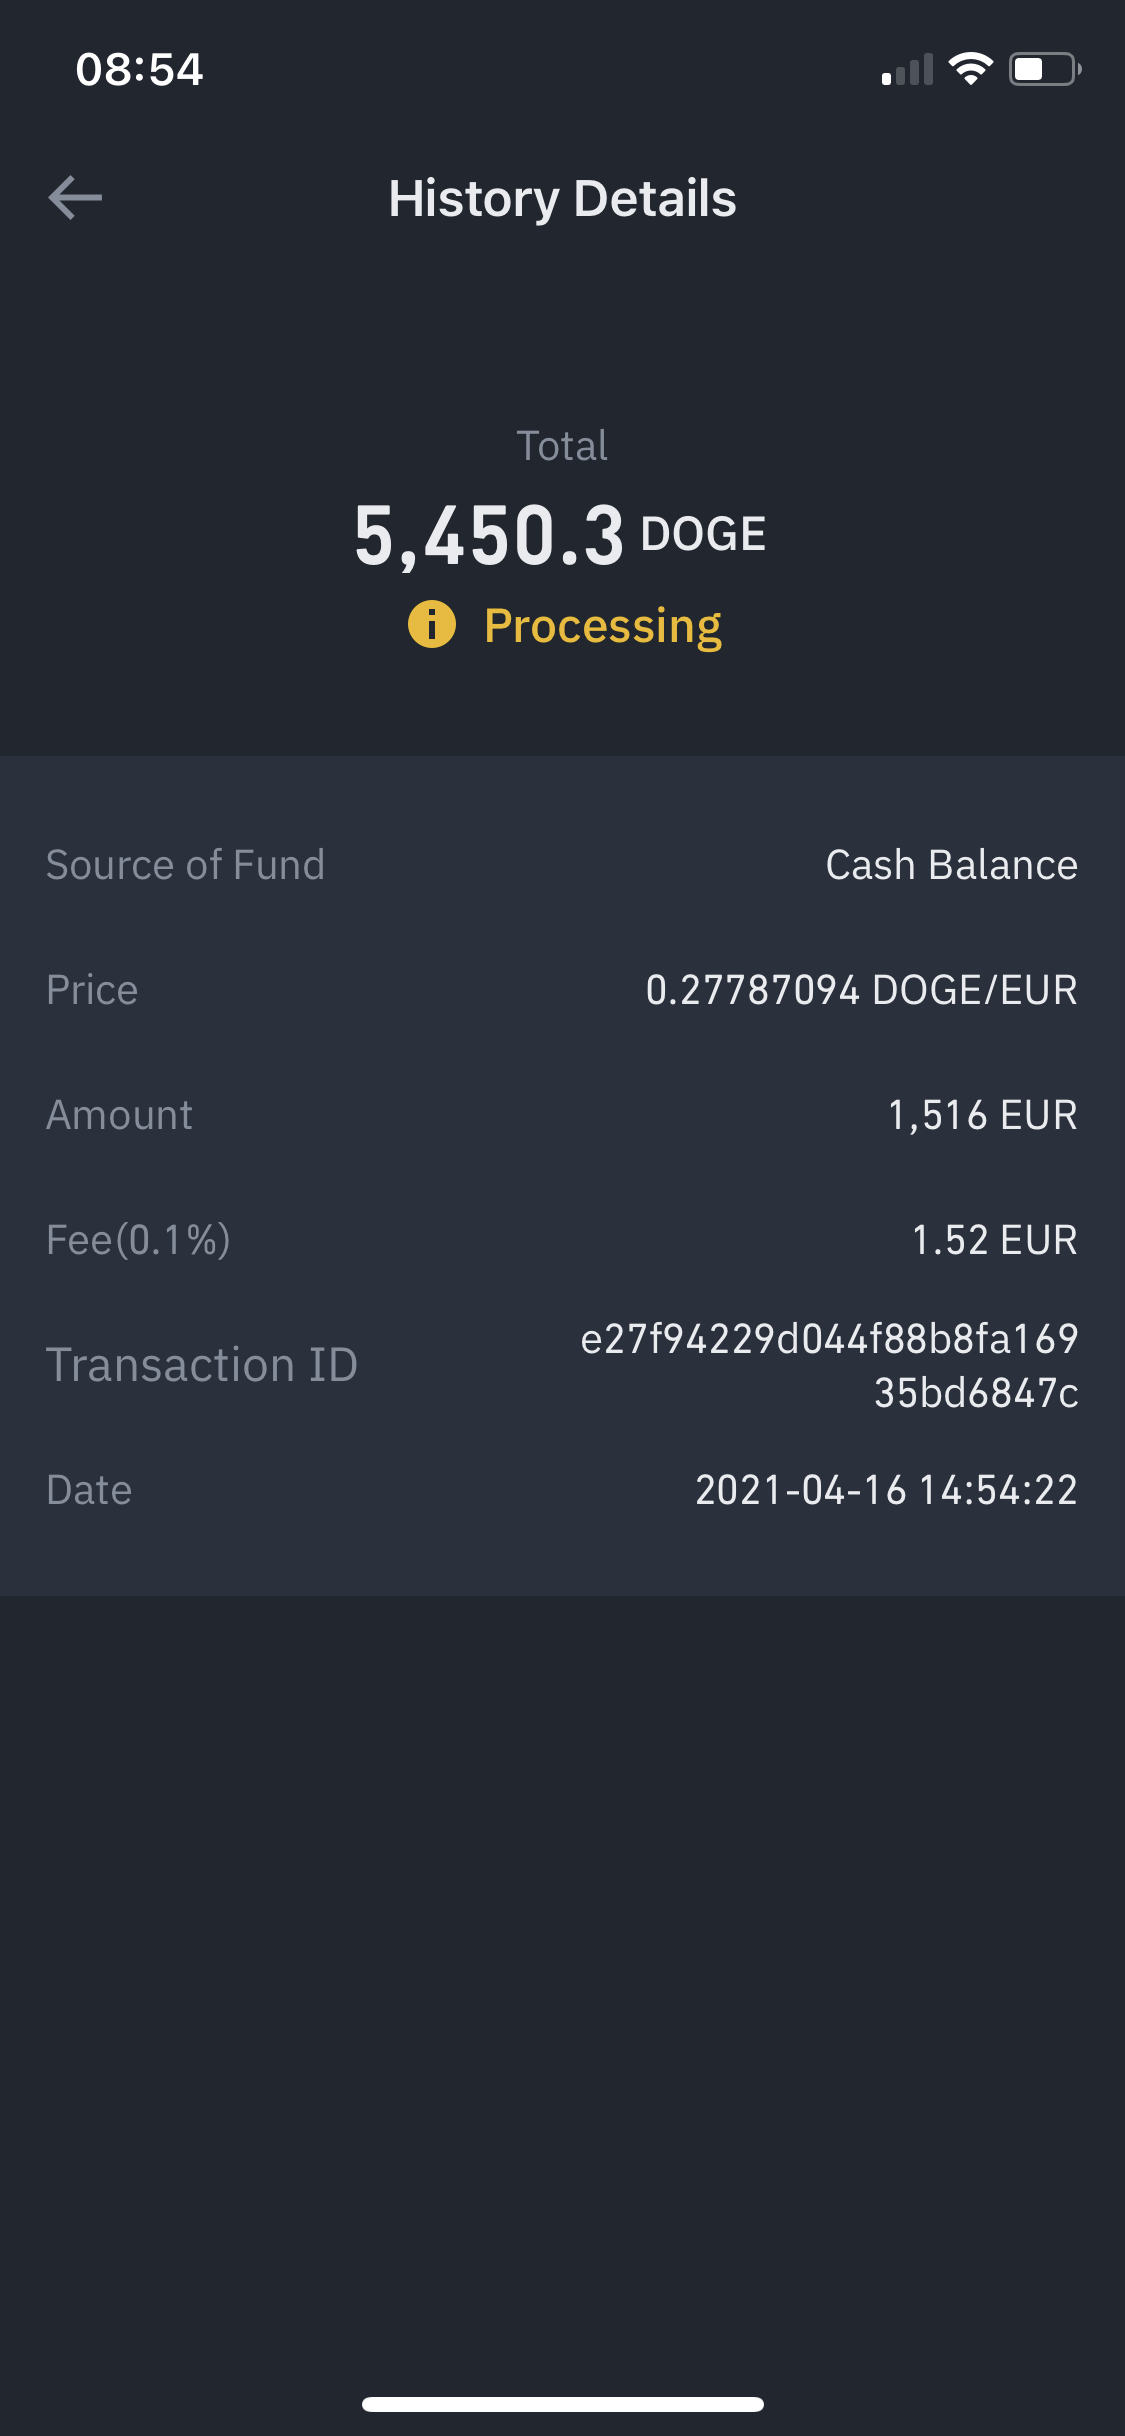 Binance complaint They took my money and support is not replying